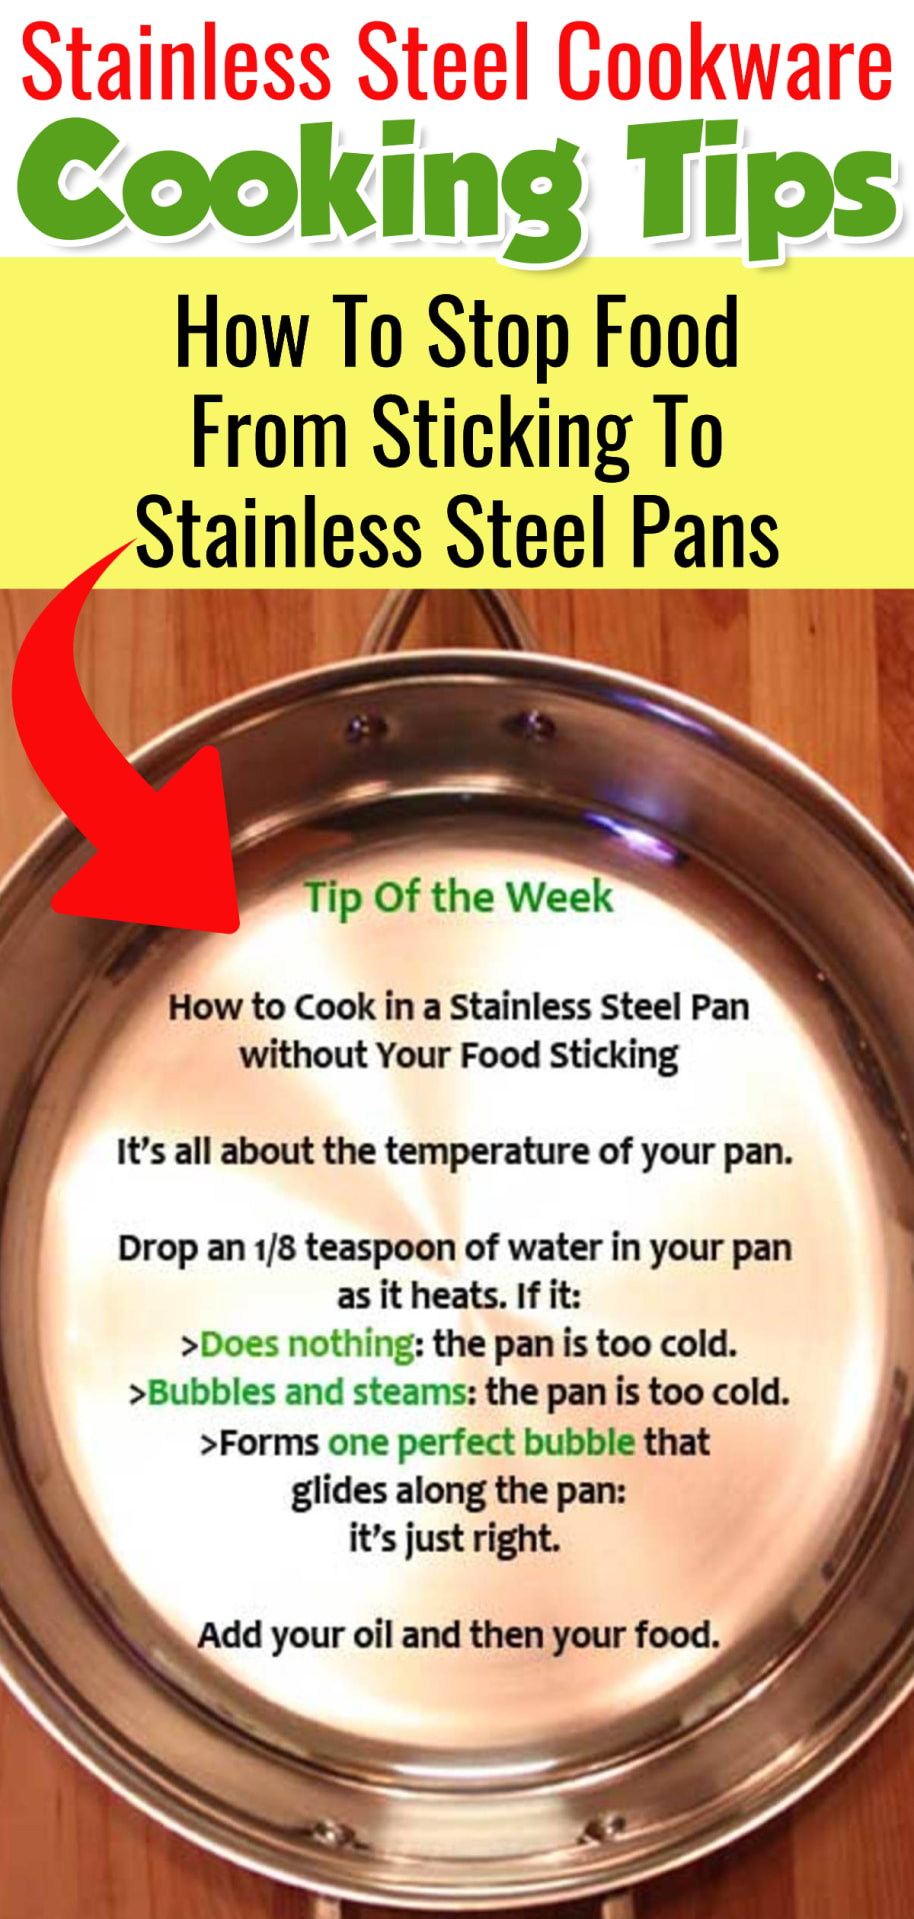 Stainless steel cookware cooking tips - how to cook with stainless steel pans tips - how to stop stainless steel pans sticking - cooking videos for beginners - cooking tips and tricks - easy breakfast recipes and easy omelette recipes - how to make an omelette videos